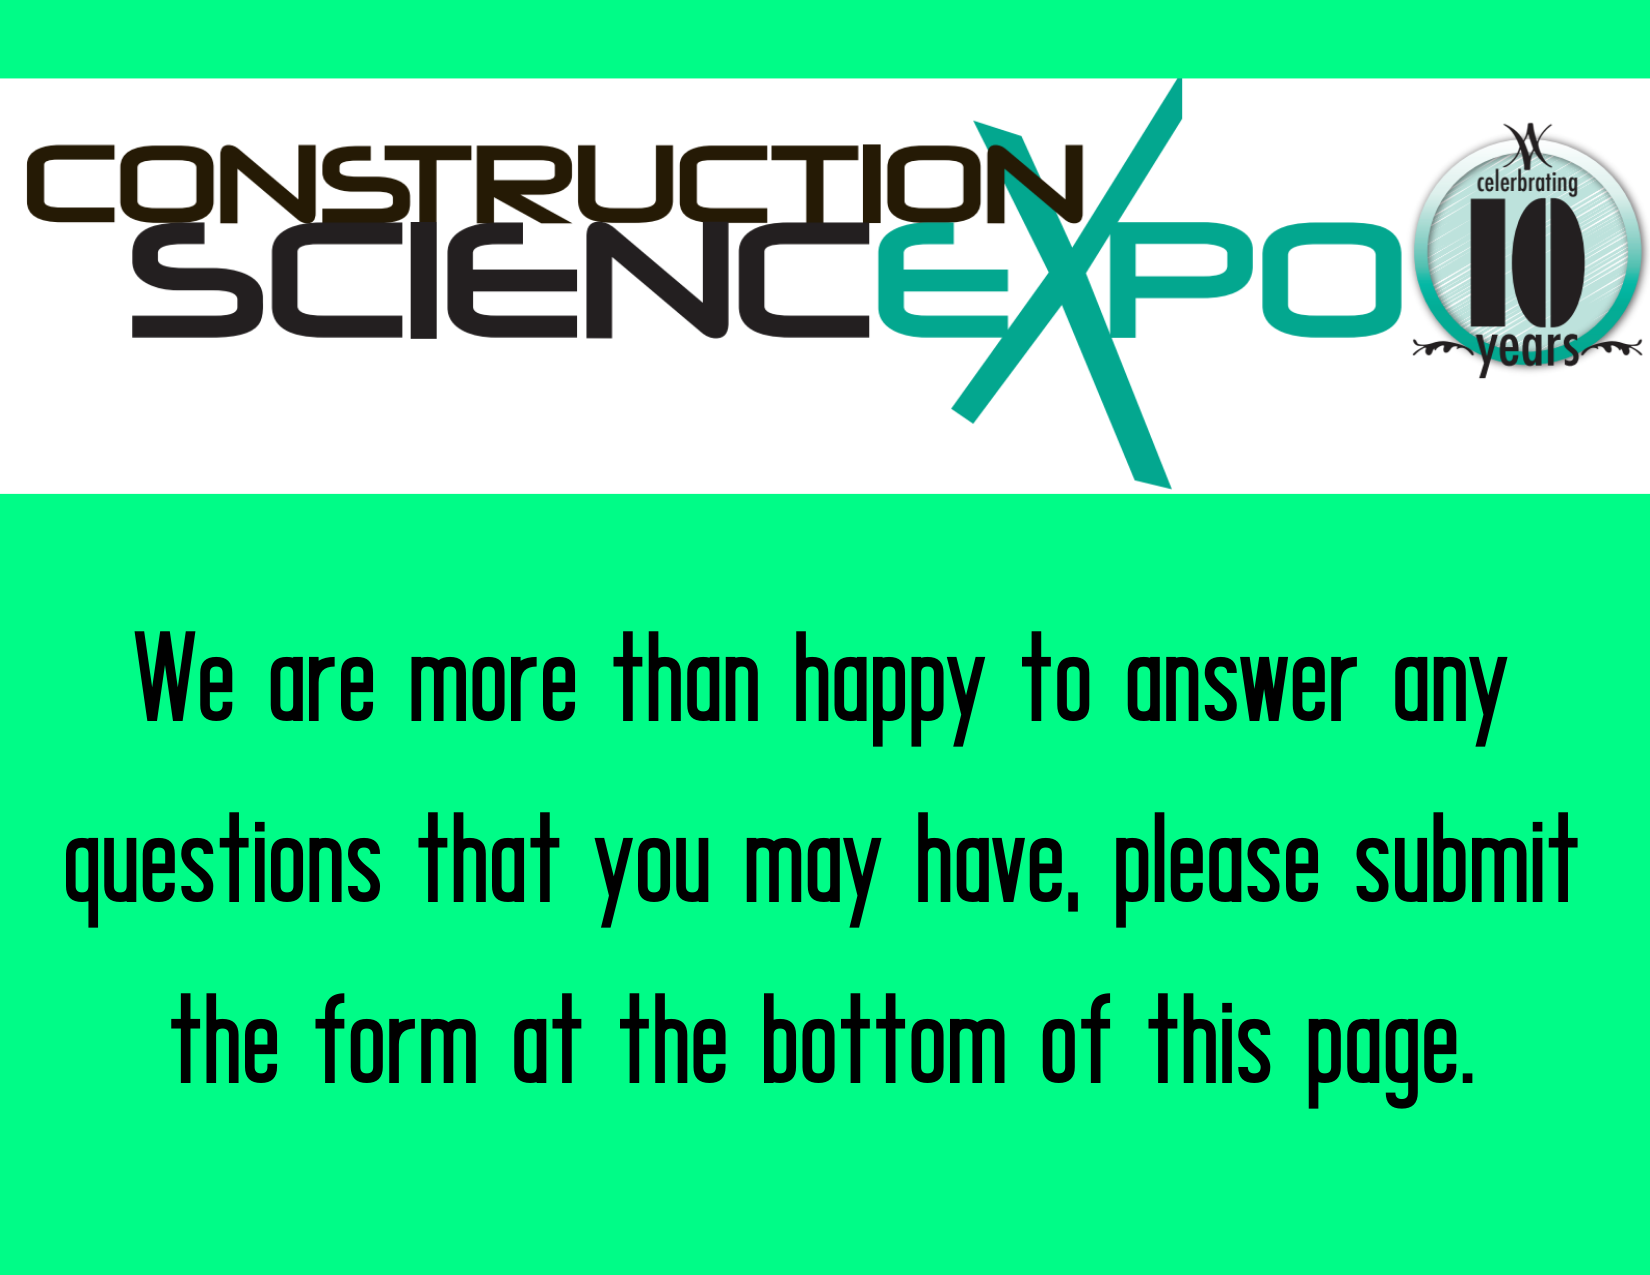 We are more than happy to answer any questions that you may have, please submit the form at the bottom of this page.